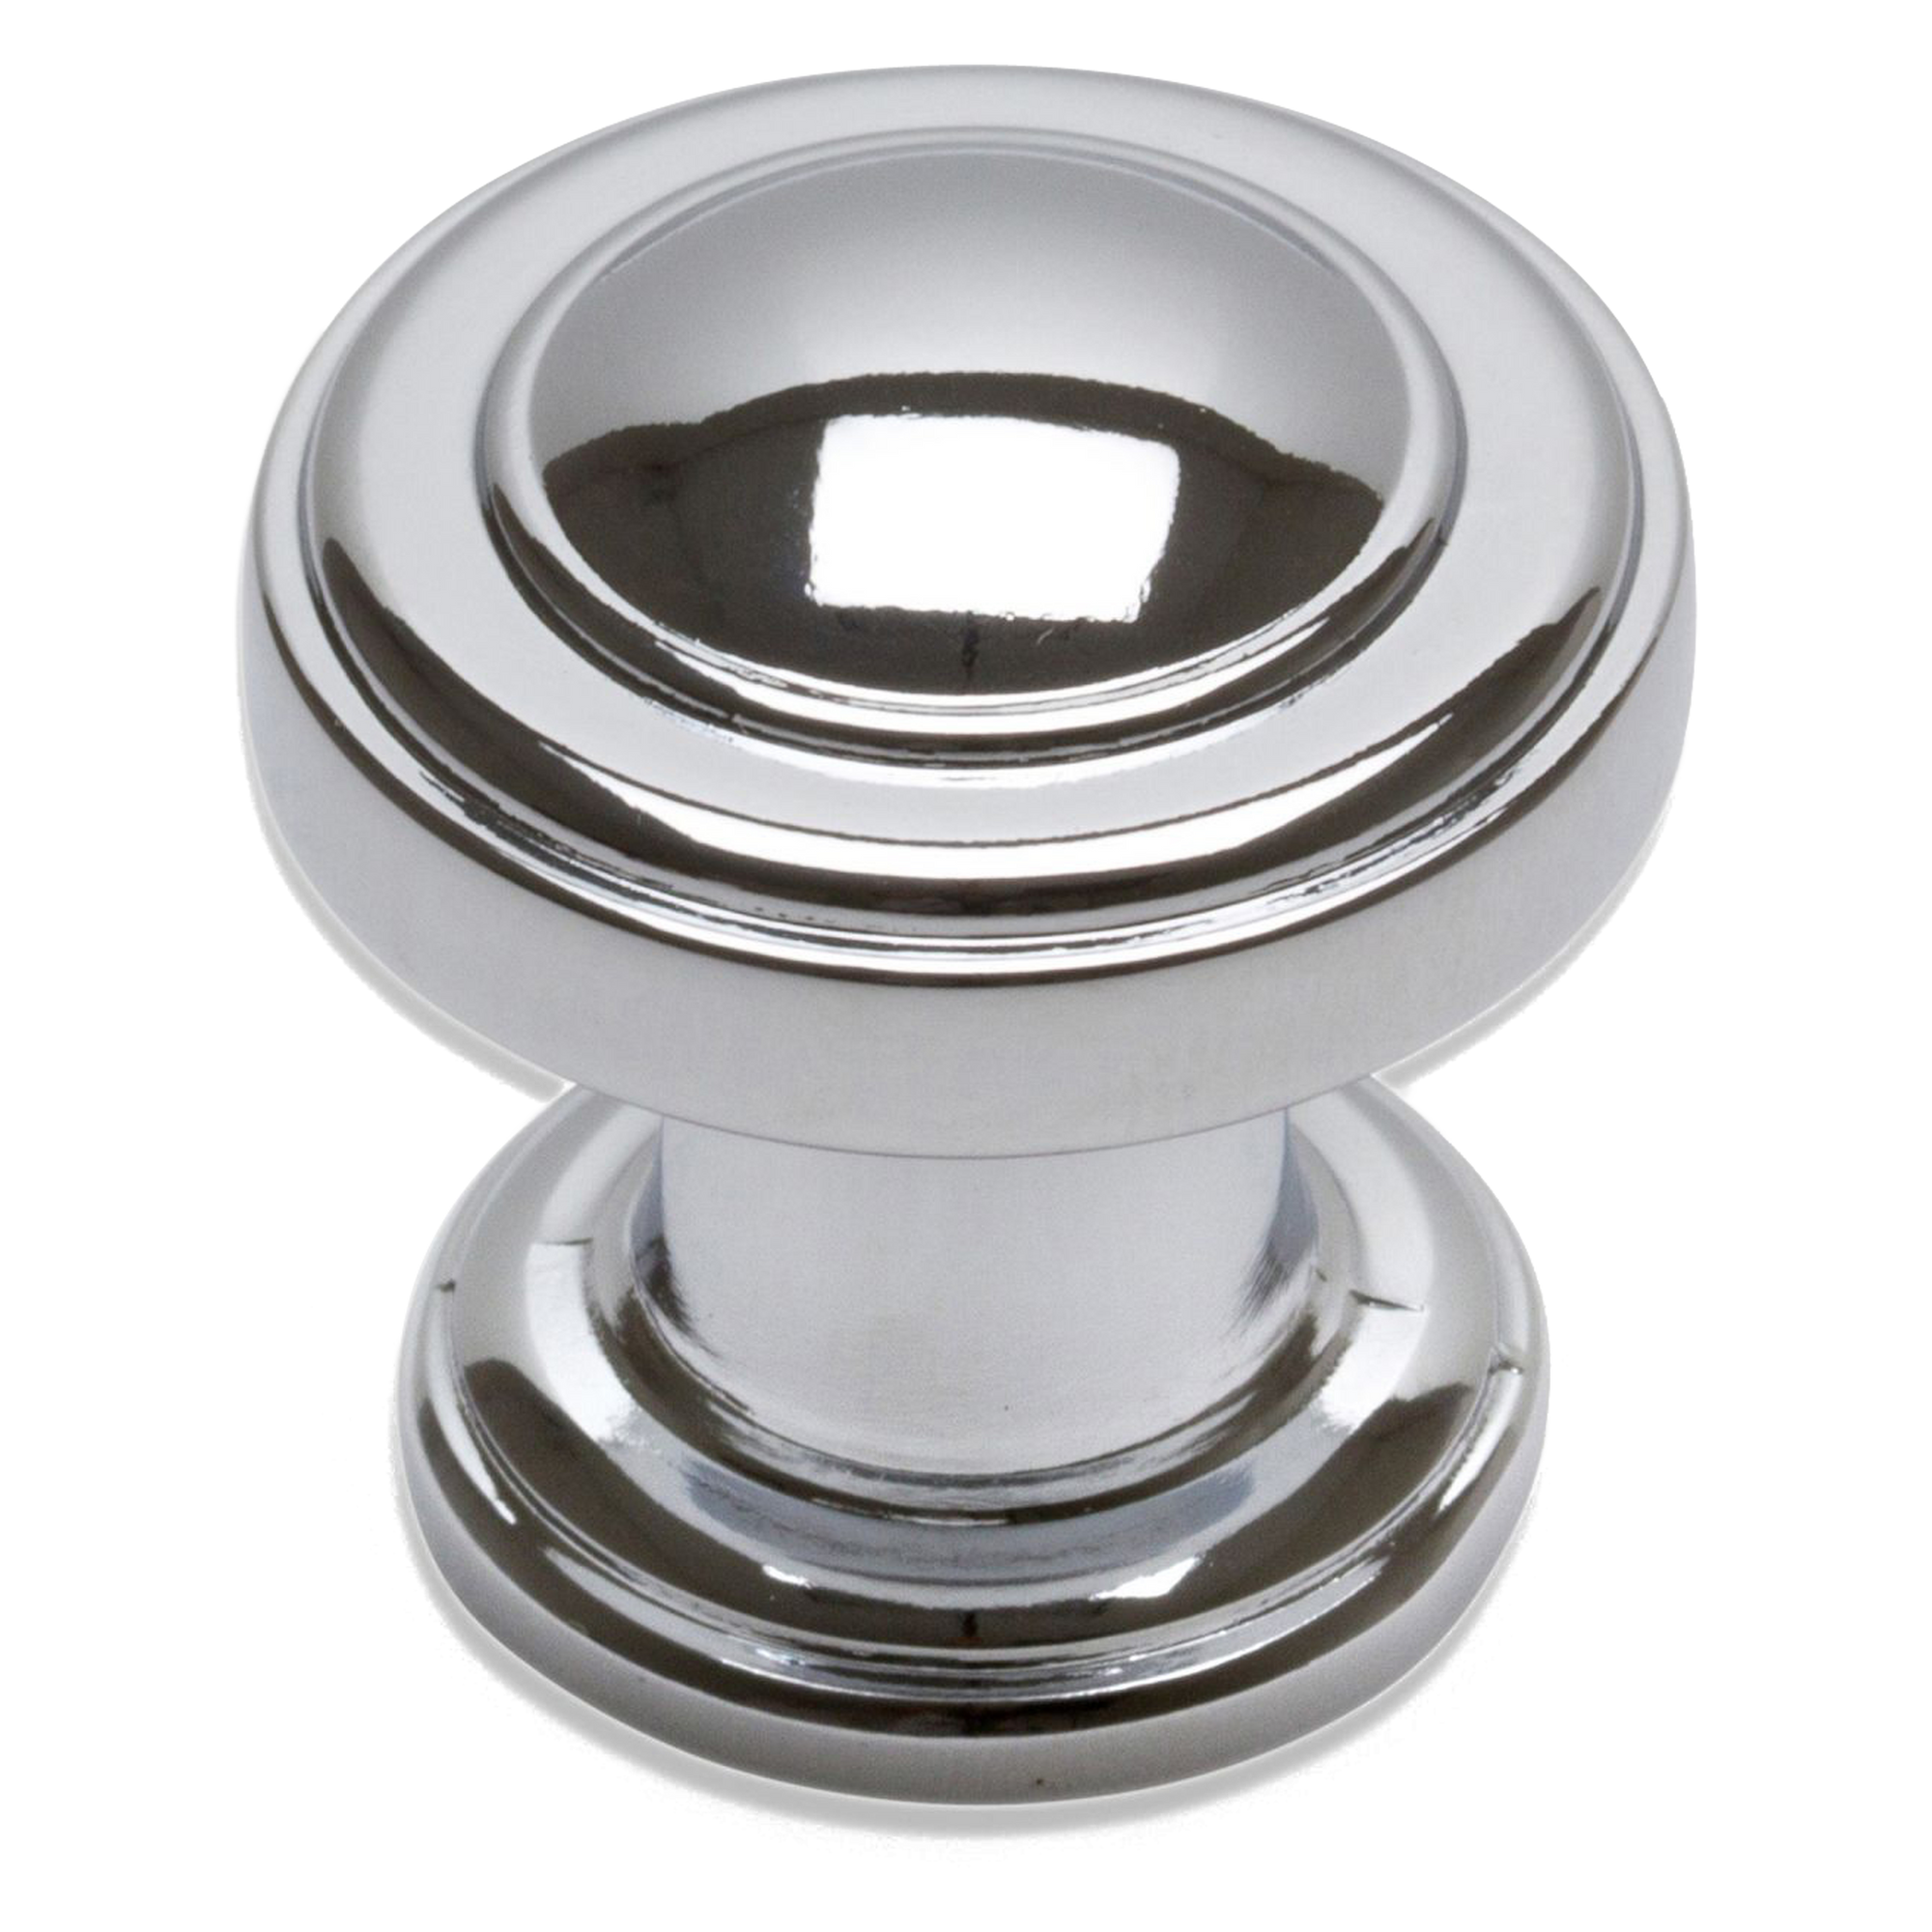 A contemporary brushed nickel knob with raised ring detailing.